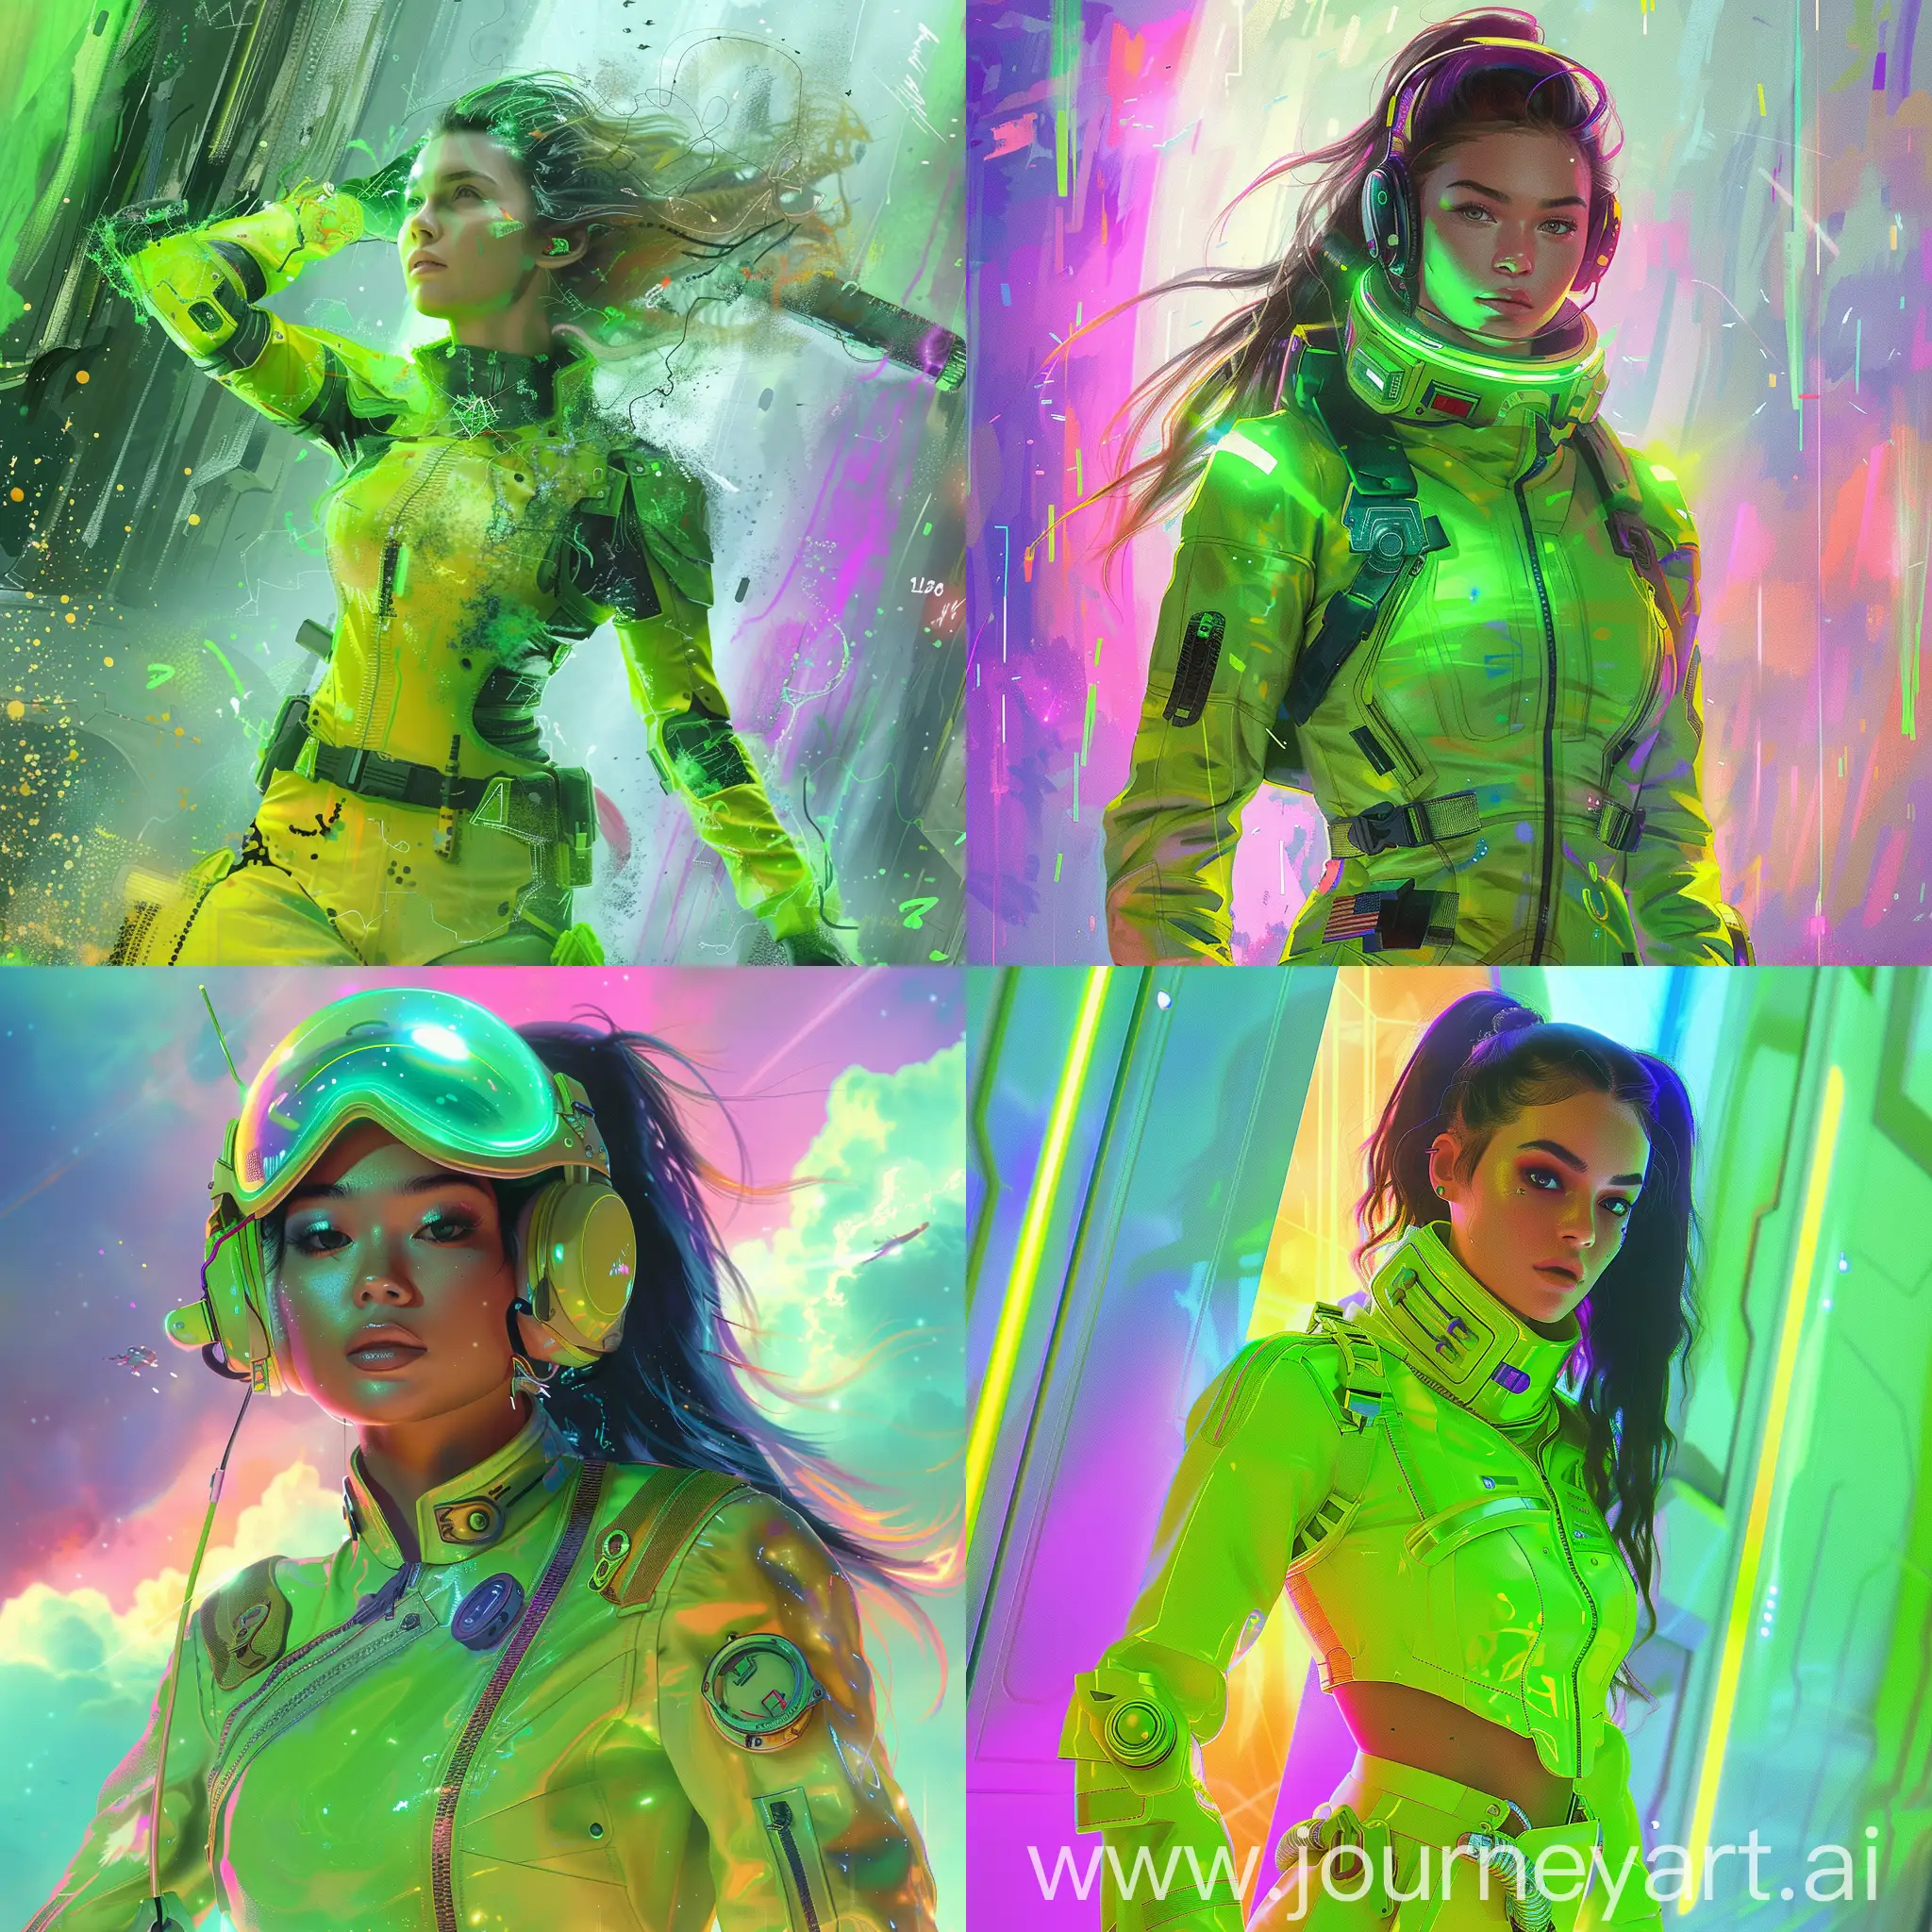 Space battle women in a neon green outfit. She's in a land of pastel colors.